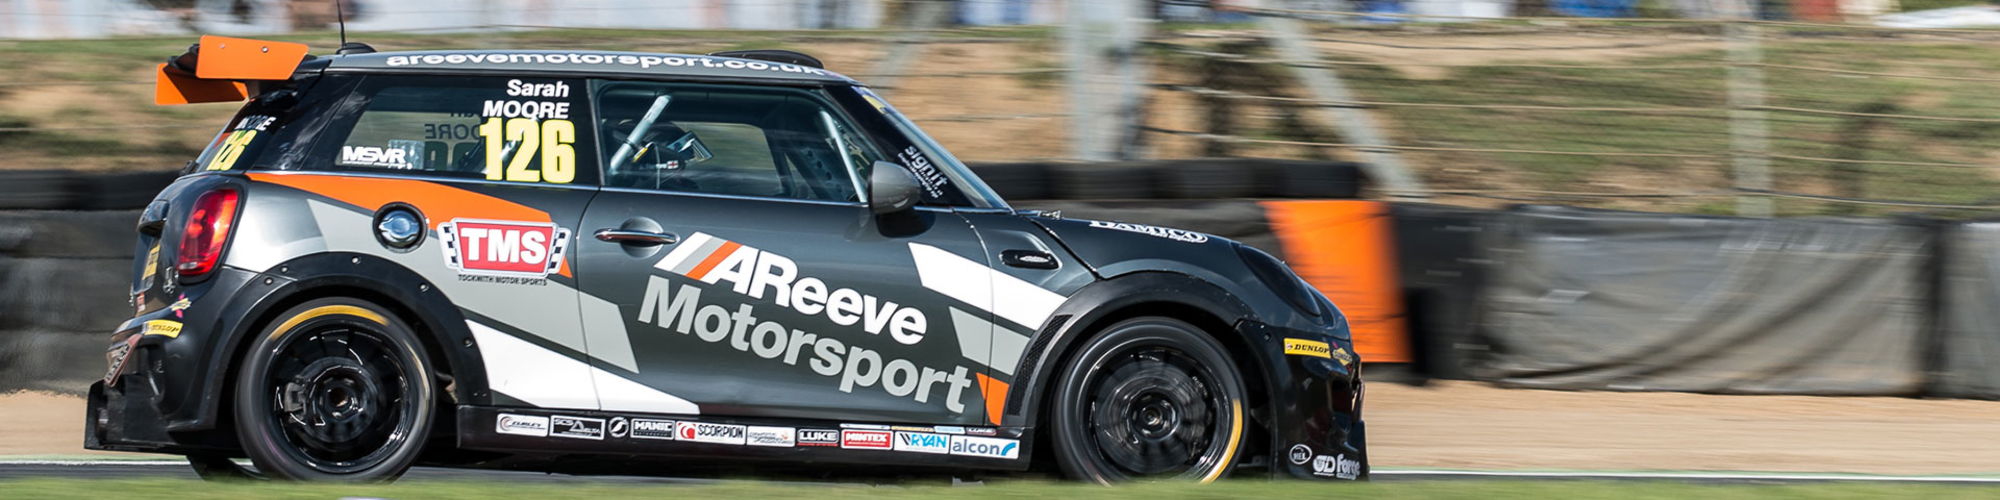 AReeve Motorsport  cover image